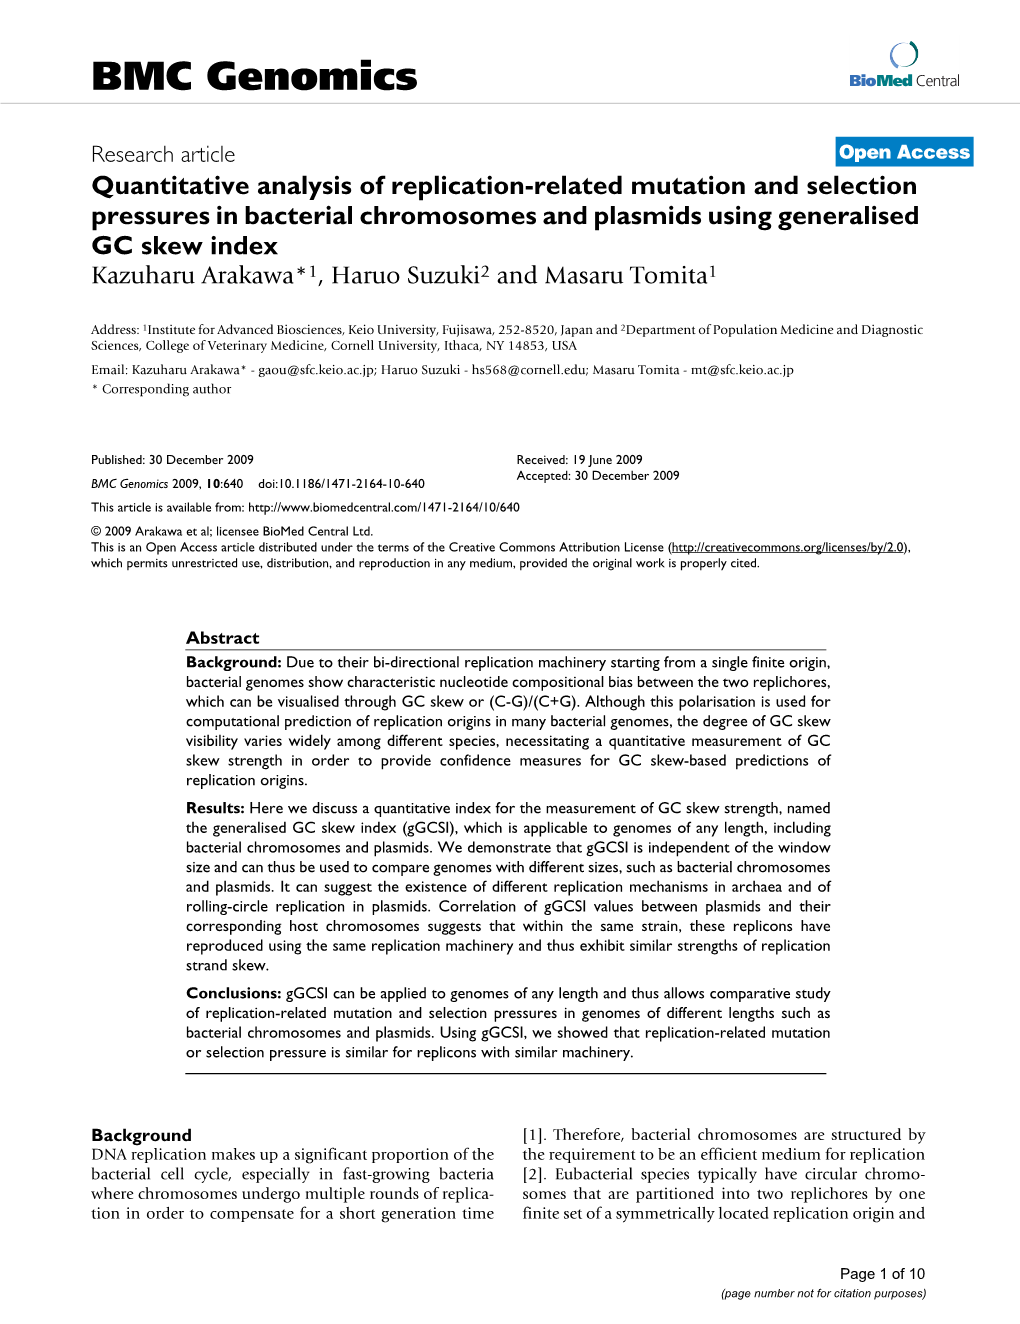 Quantitative Analysis of Replication-Related Mutation And